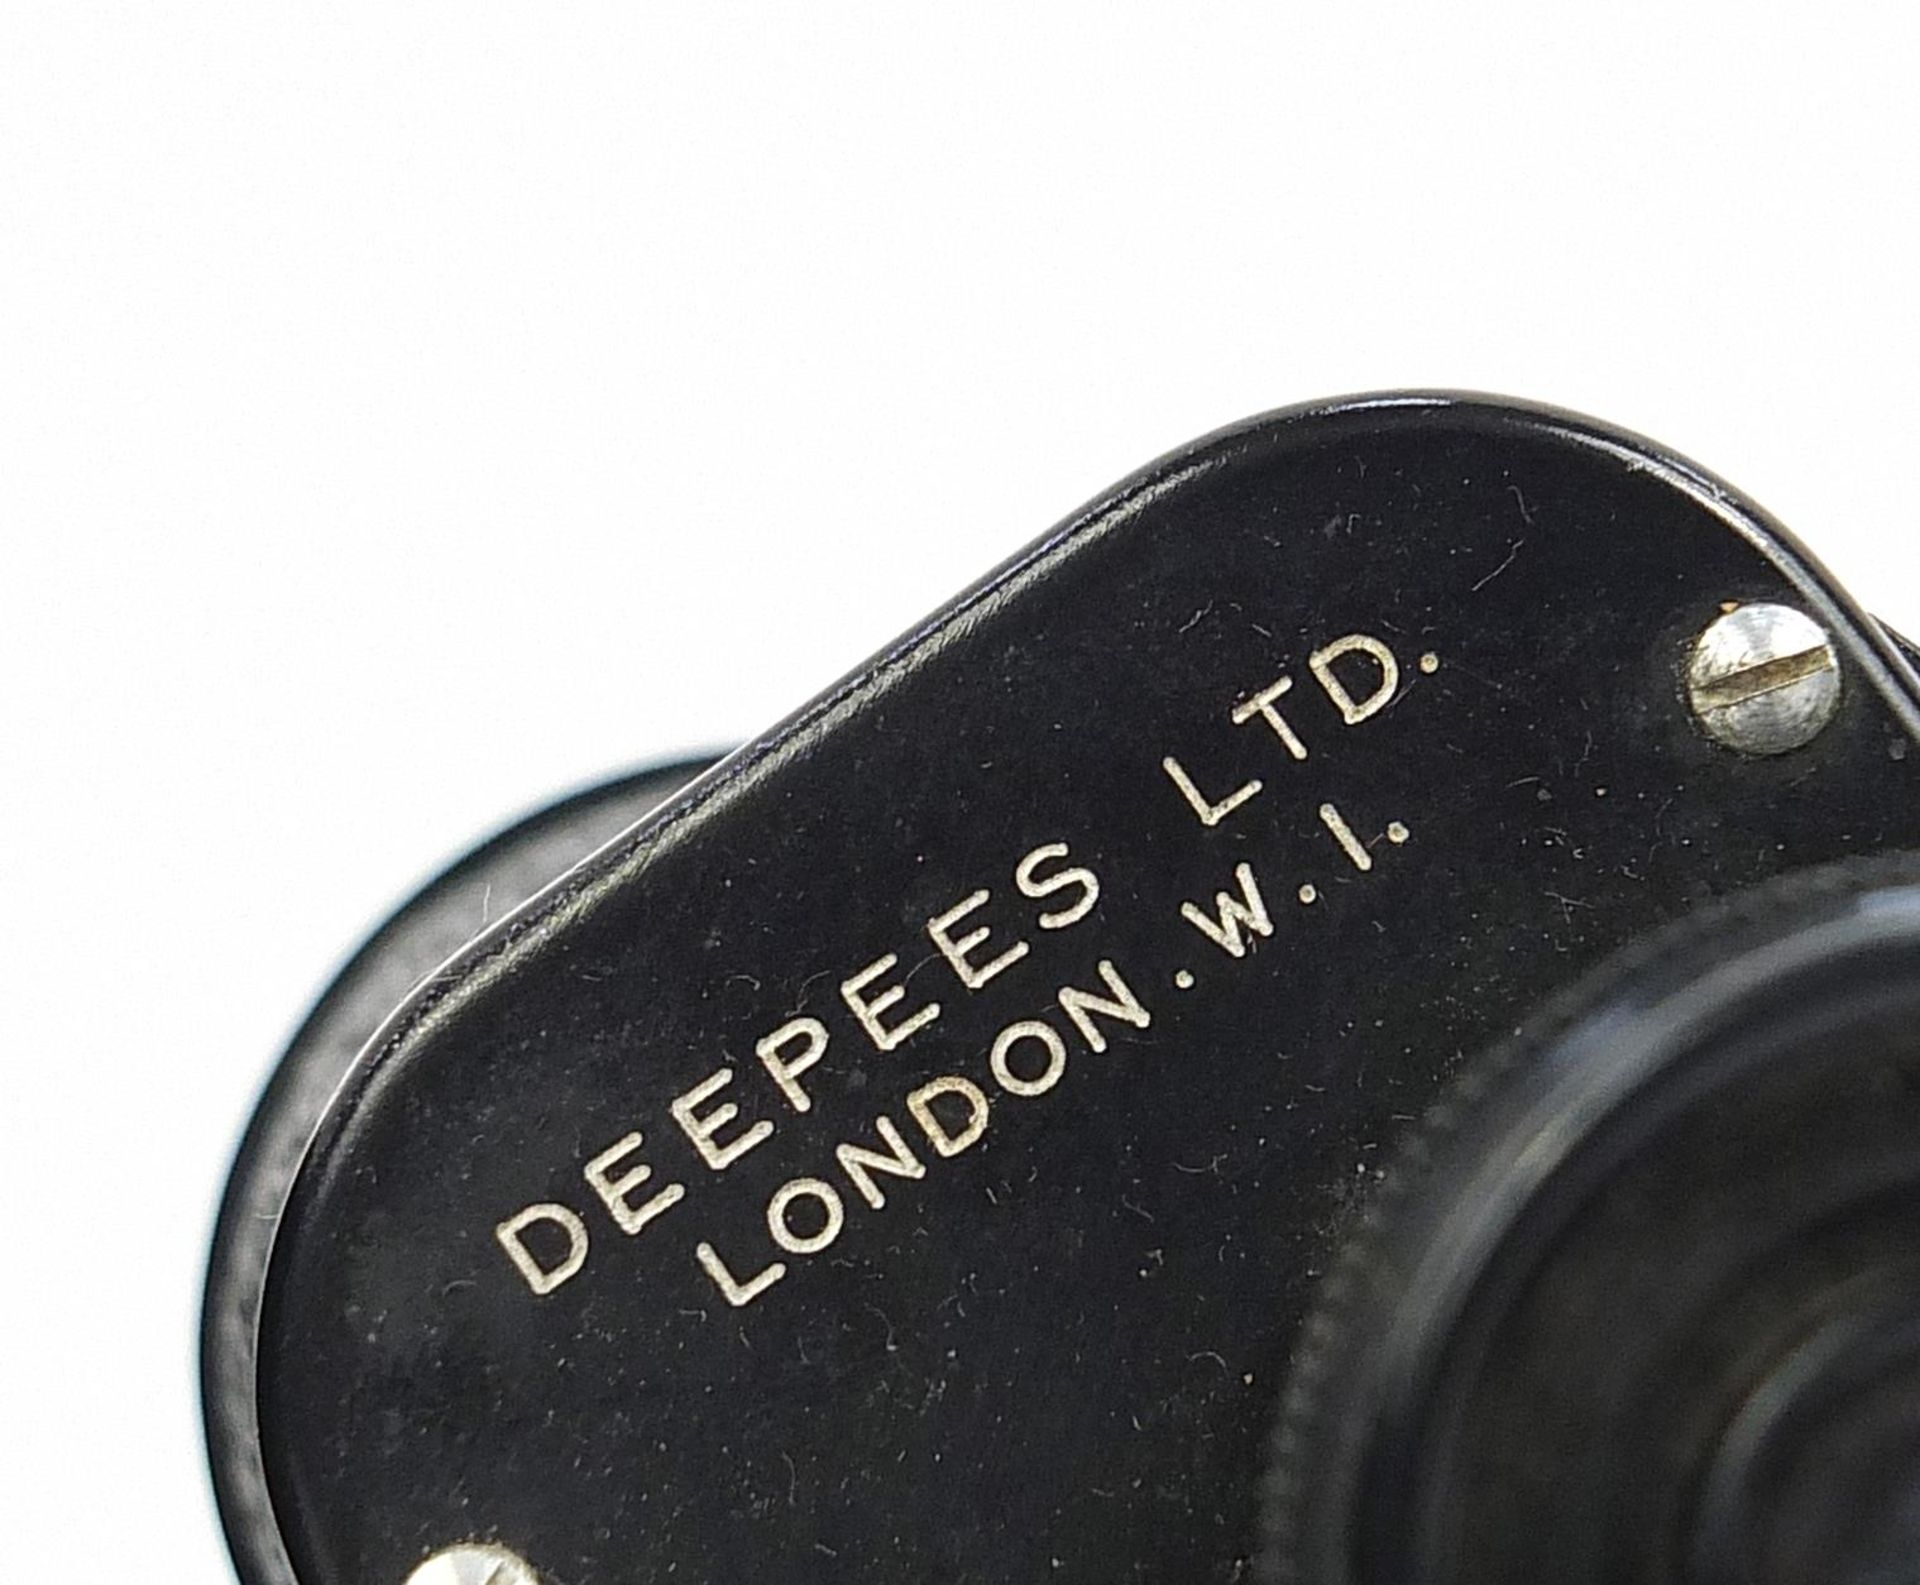 Cased pair of Depees Ltd 8x30 binoculars, London W1 and a pair of Carl Zeiss Jena binoculars with - Image 5 of 5